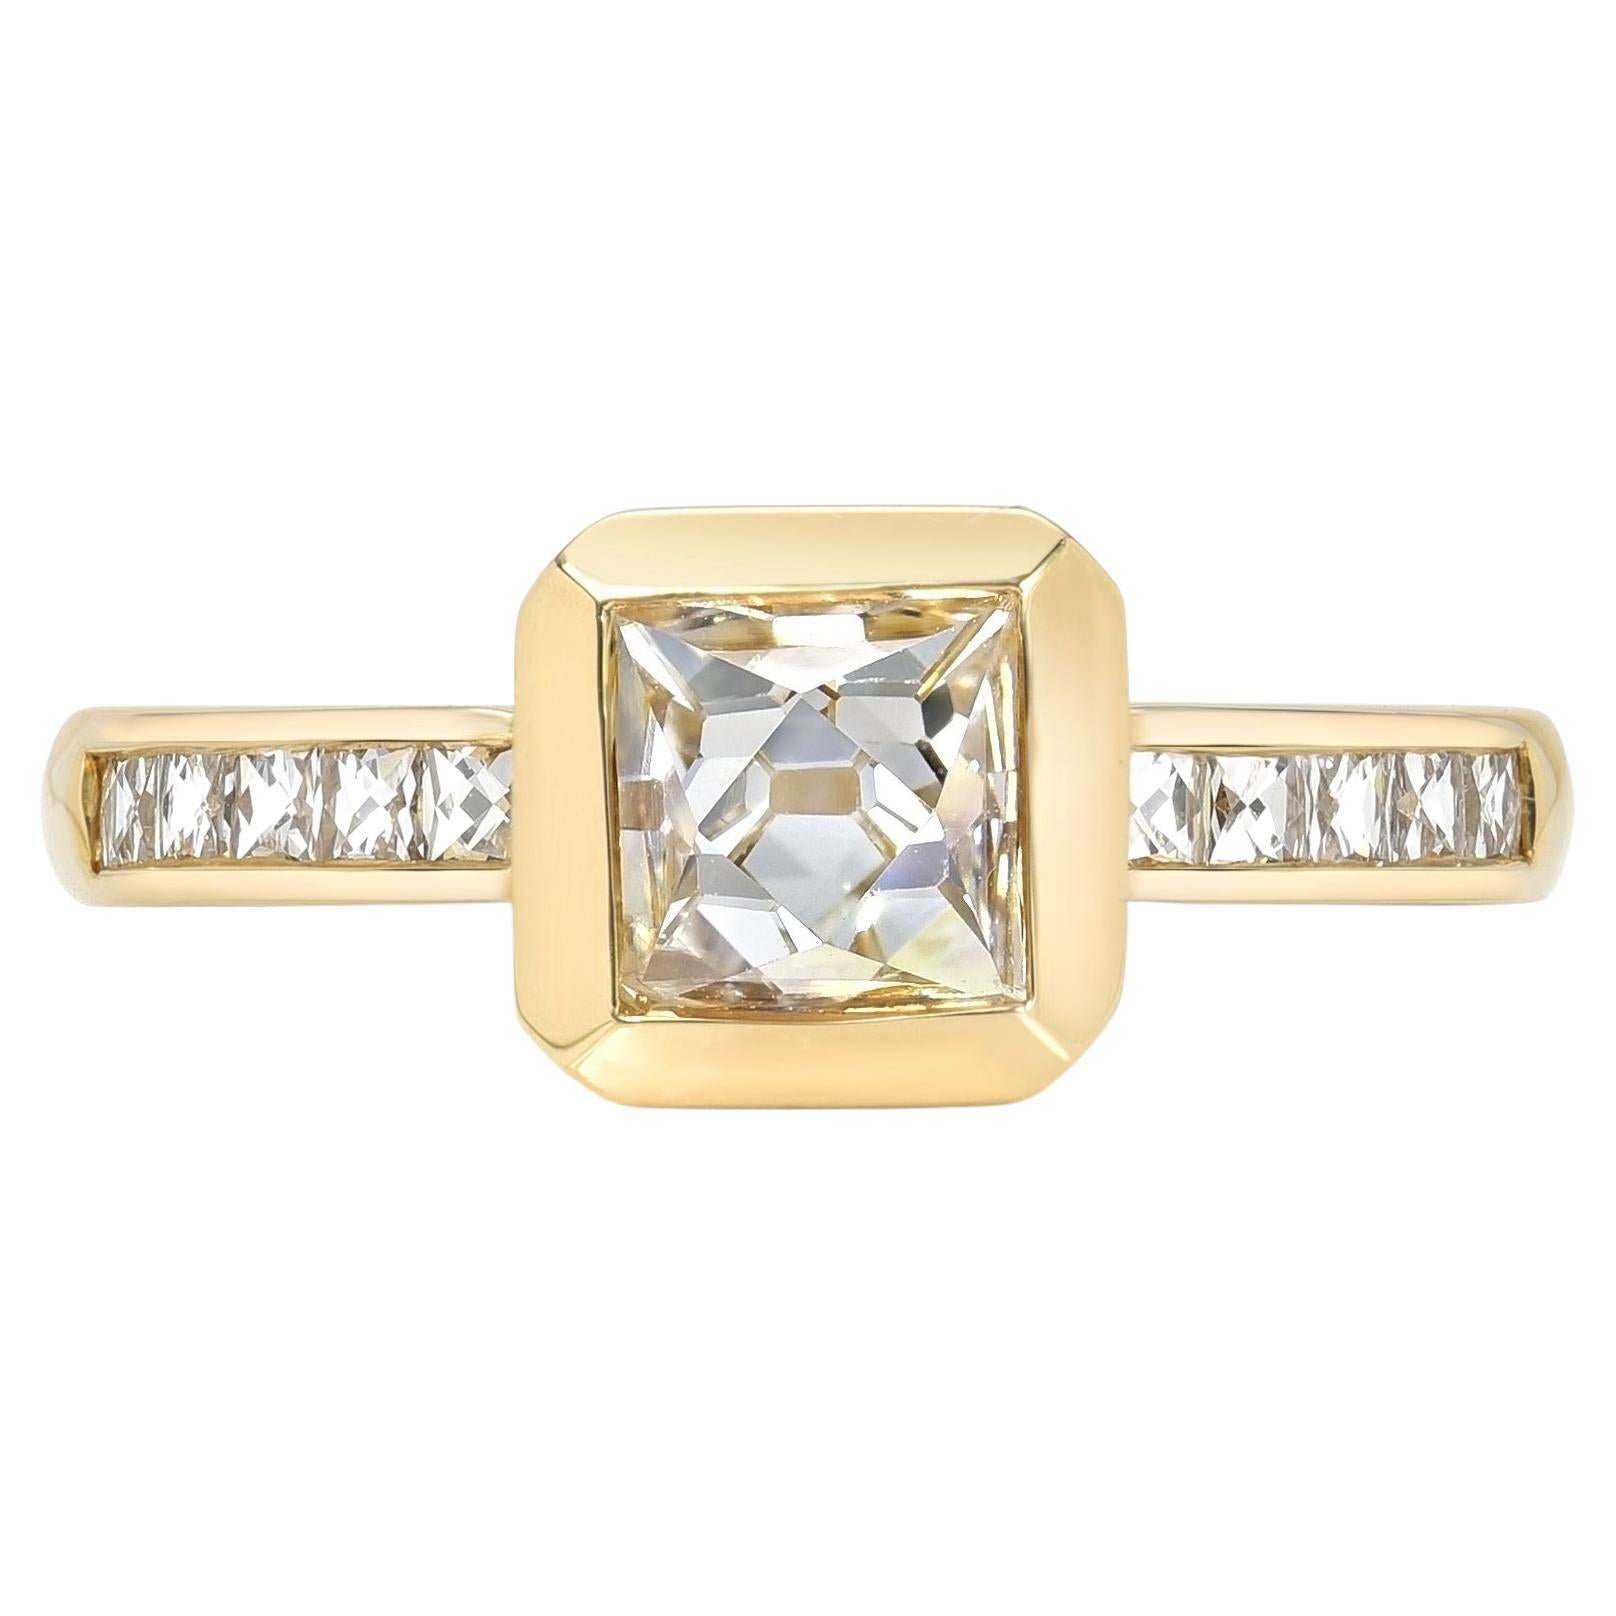 Handcrafted Karina French Cut Diamond Ring by Single Stone For Sale